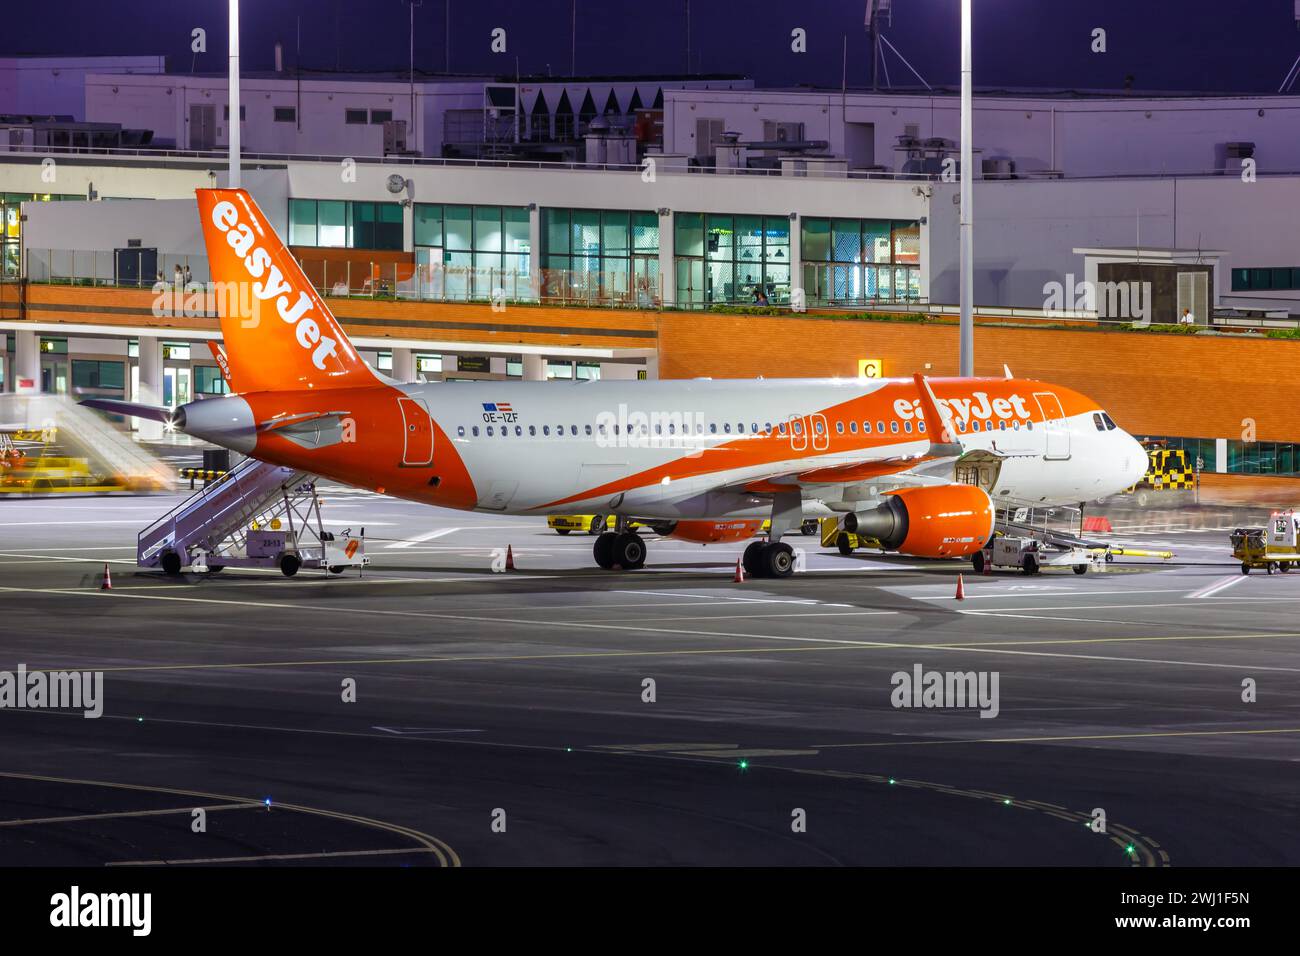 EasyJet Airbus A320 aircraft Funchal airport in Portugal Stock Photo